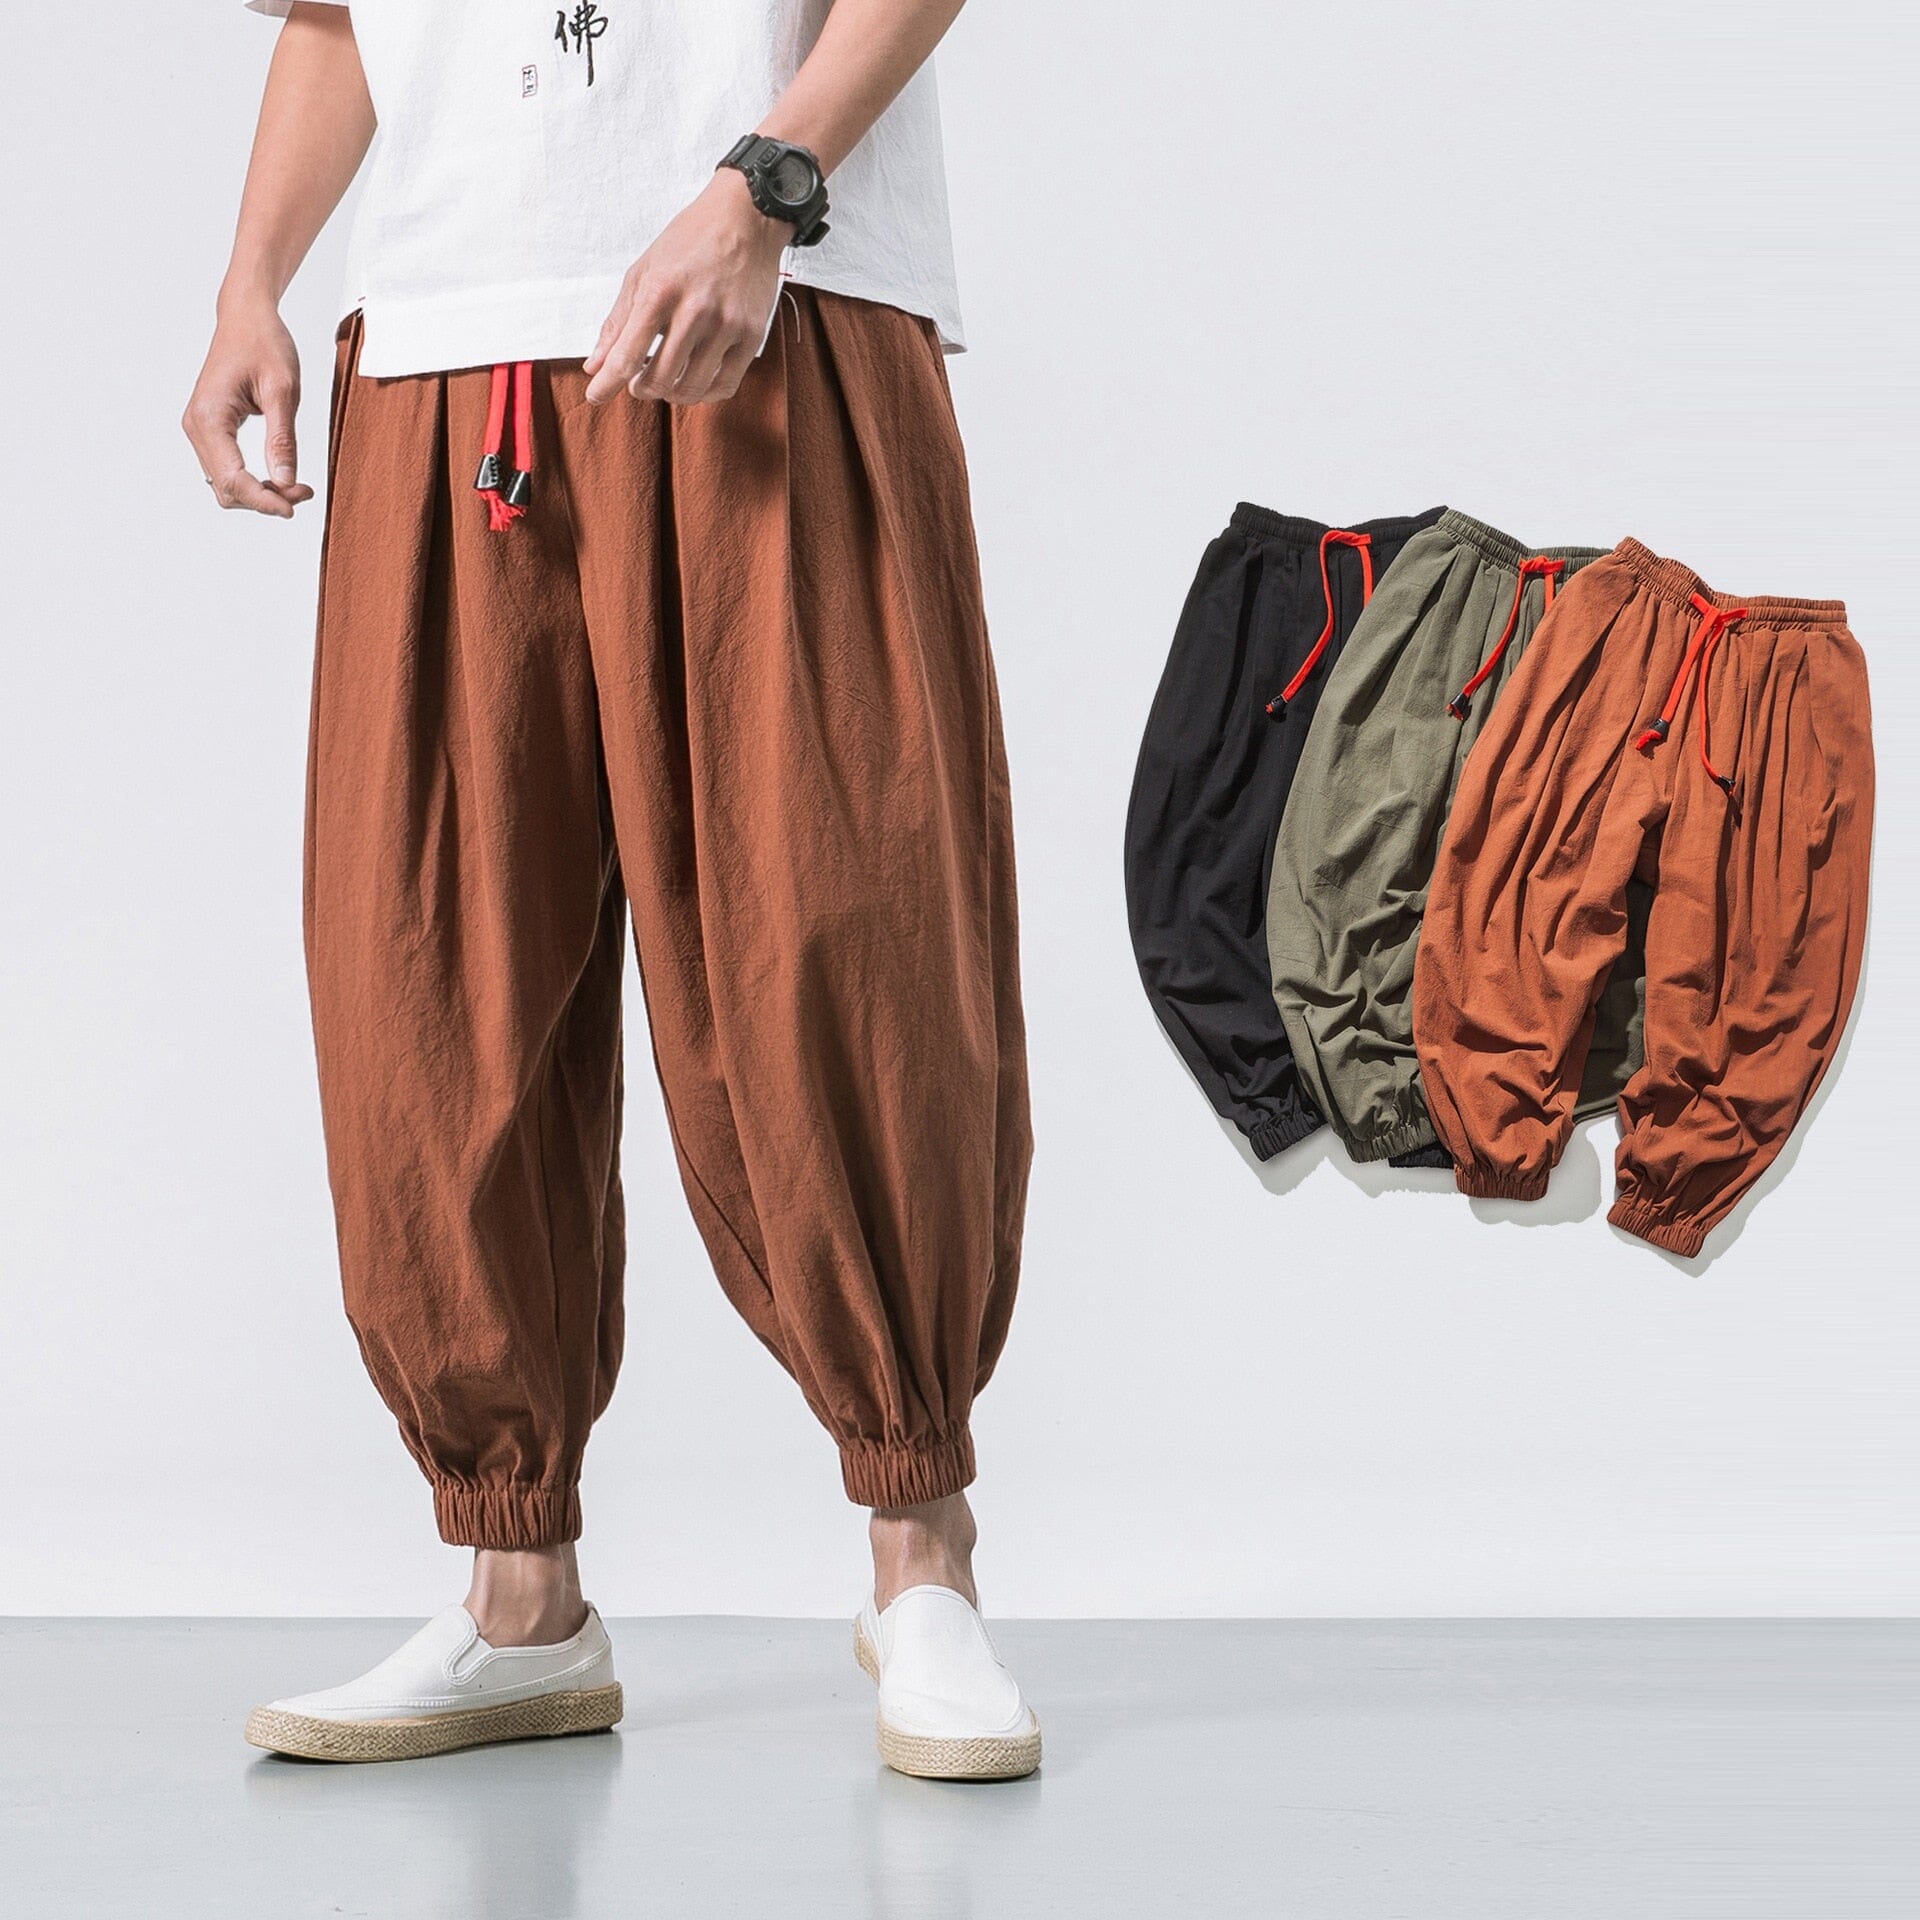 FGKKS Spring Men Loose Harem Pants Chinese Linen Overweight Sweatpants High Quality Casual Brand Oversize Trousers Male 0 GatoGeek 